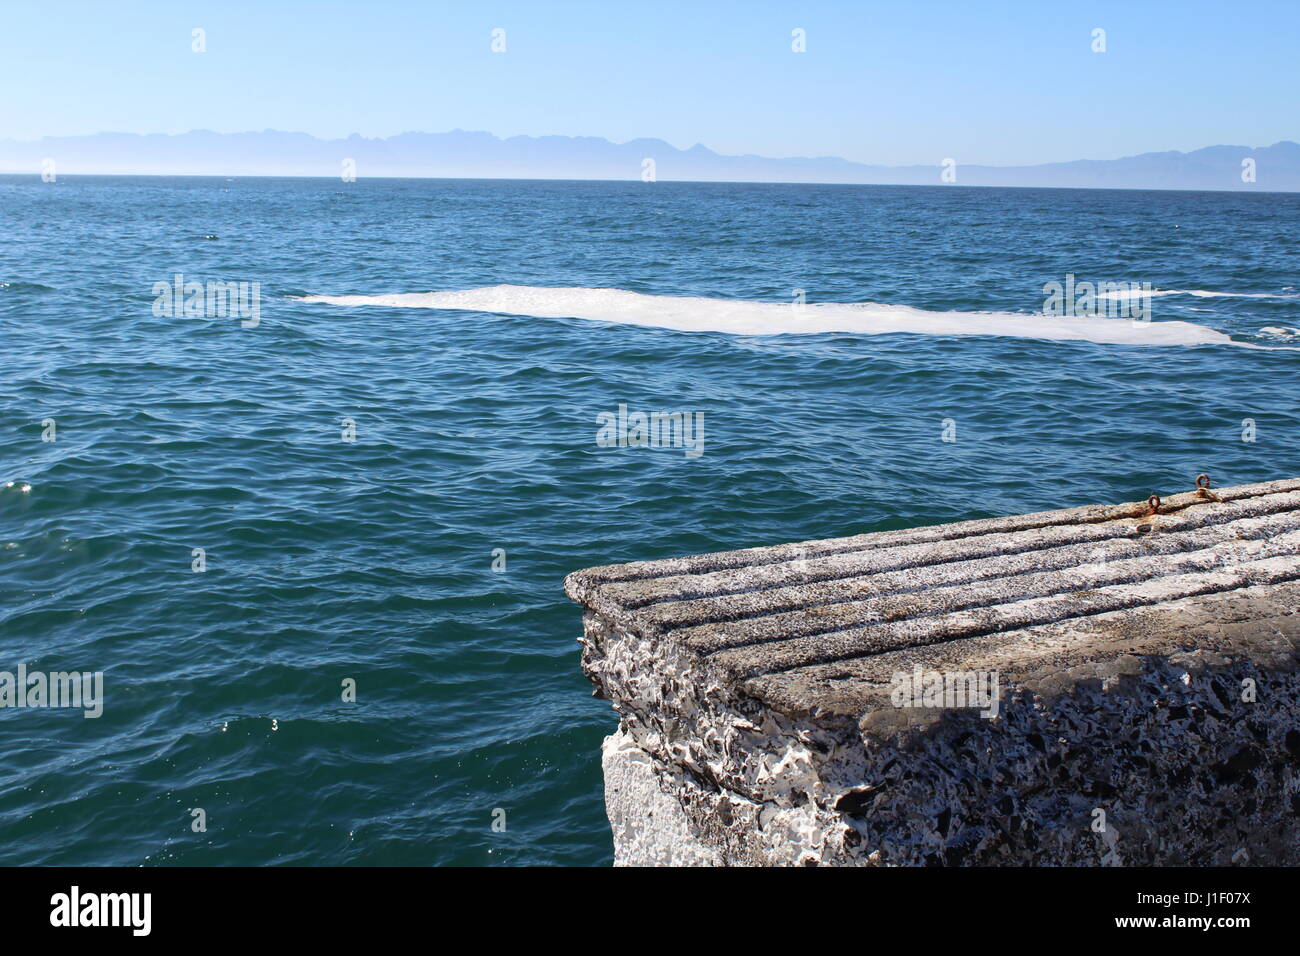 Kalk Bay harbour, Cape Town, South Africa Stock Photo